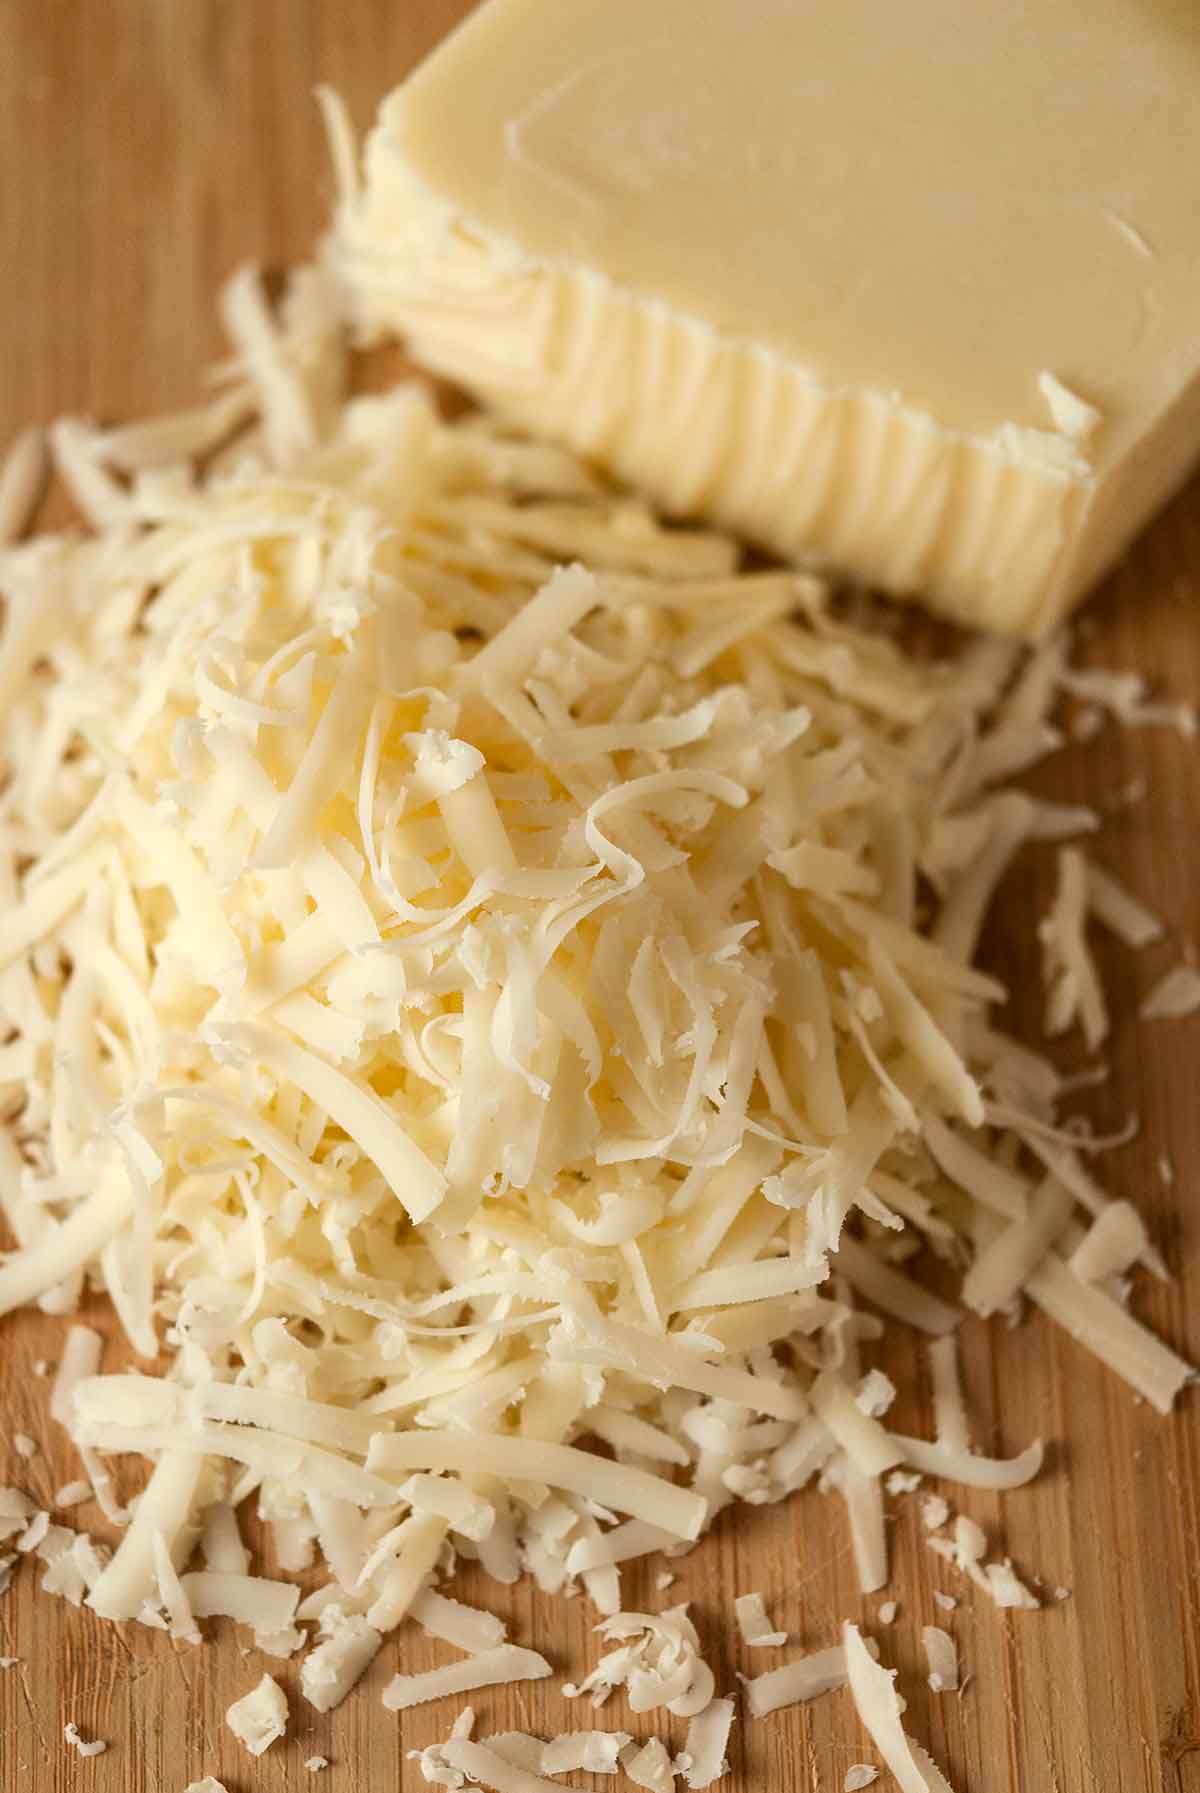 Grated cheese on a cutting board.